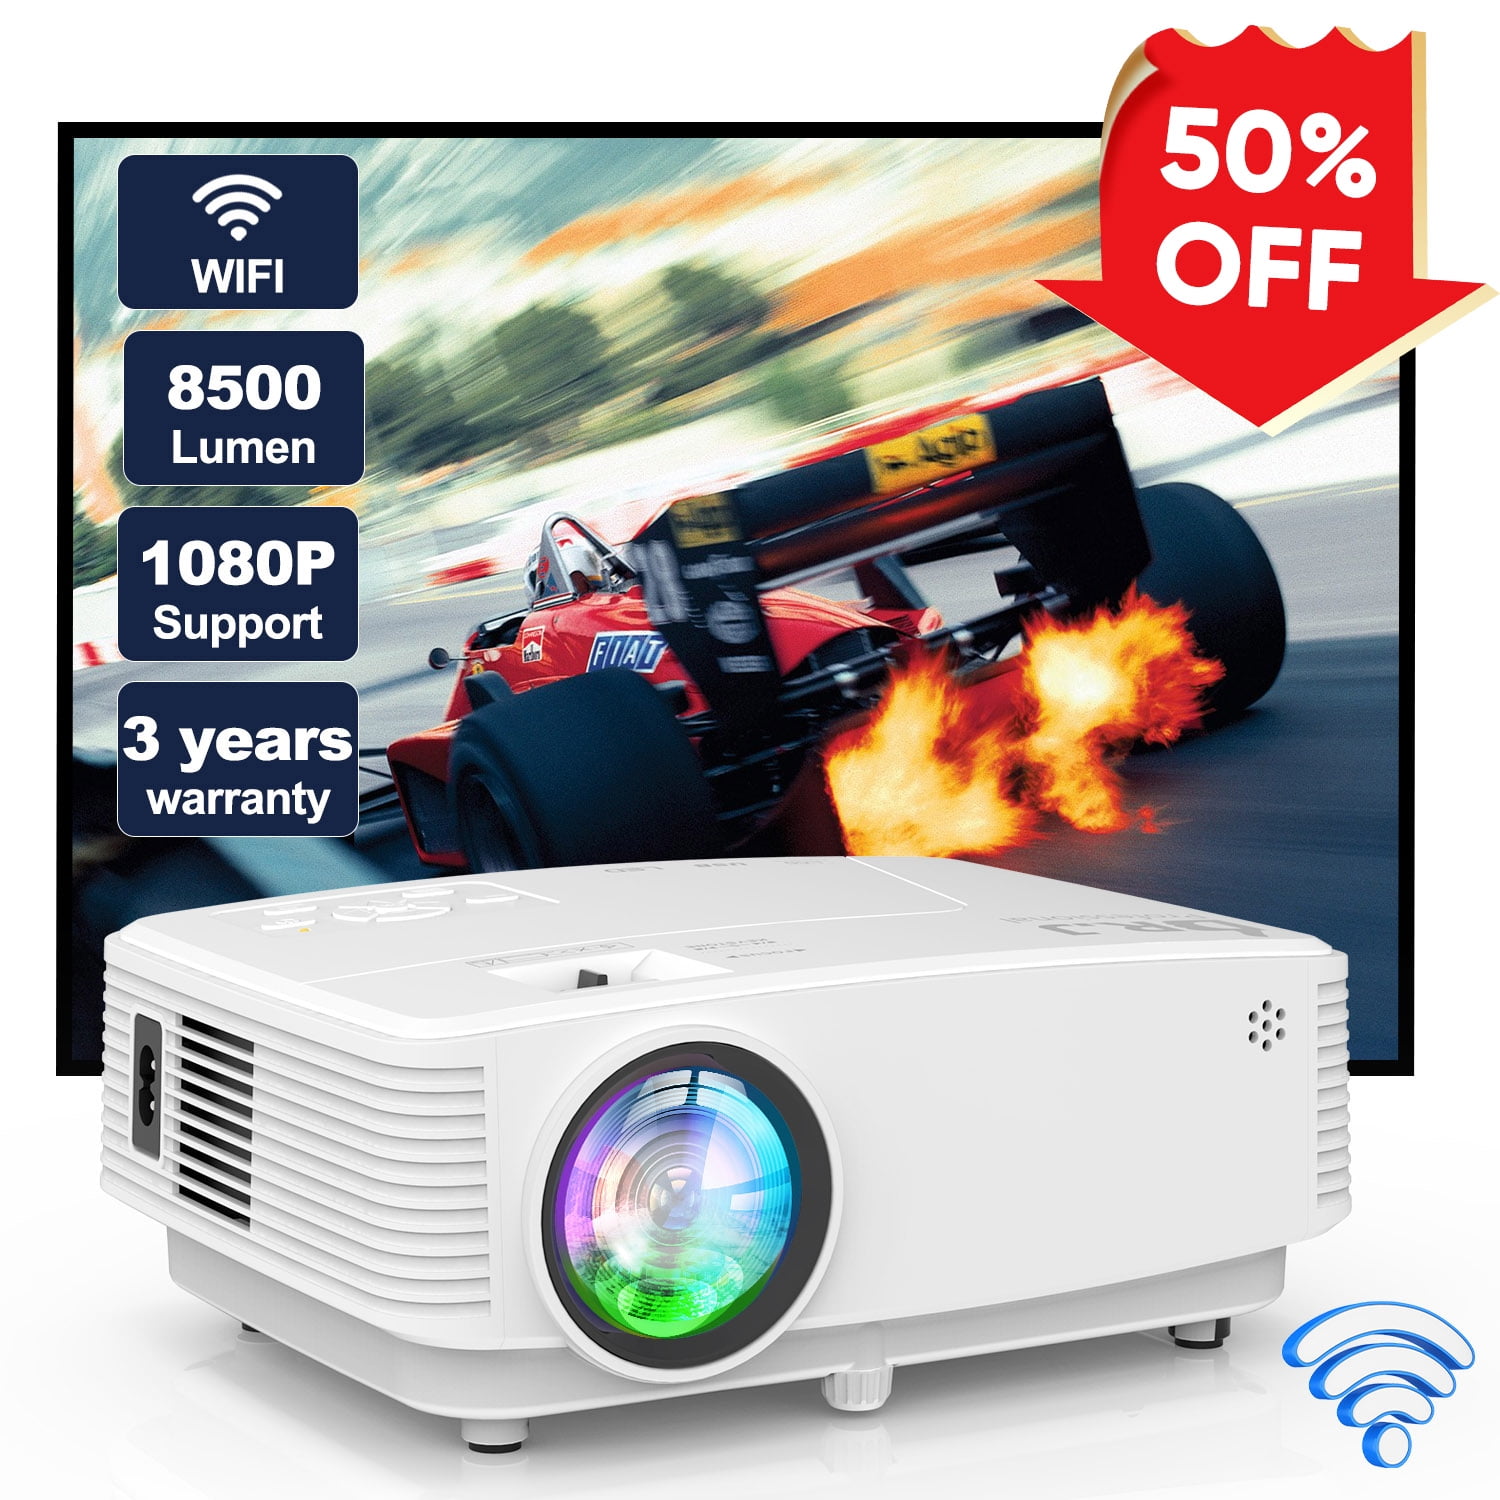 WIFI Projector 1080P FHD Portable for Home Supported 8500 Lumens -